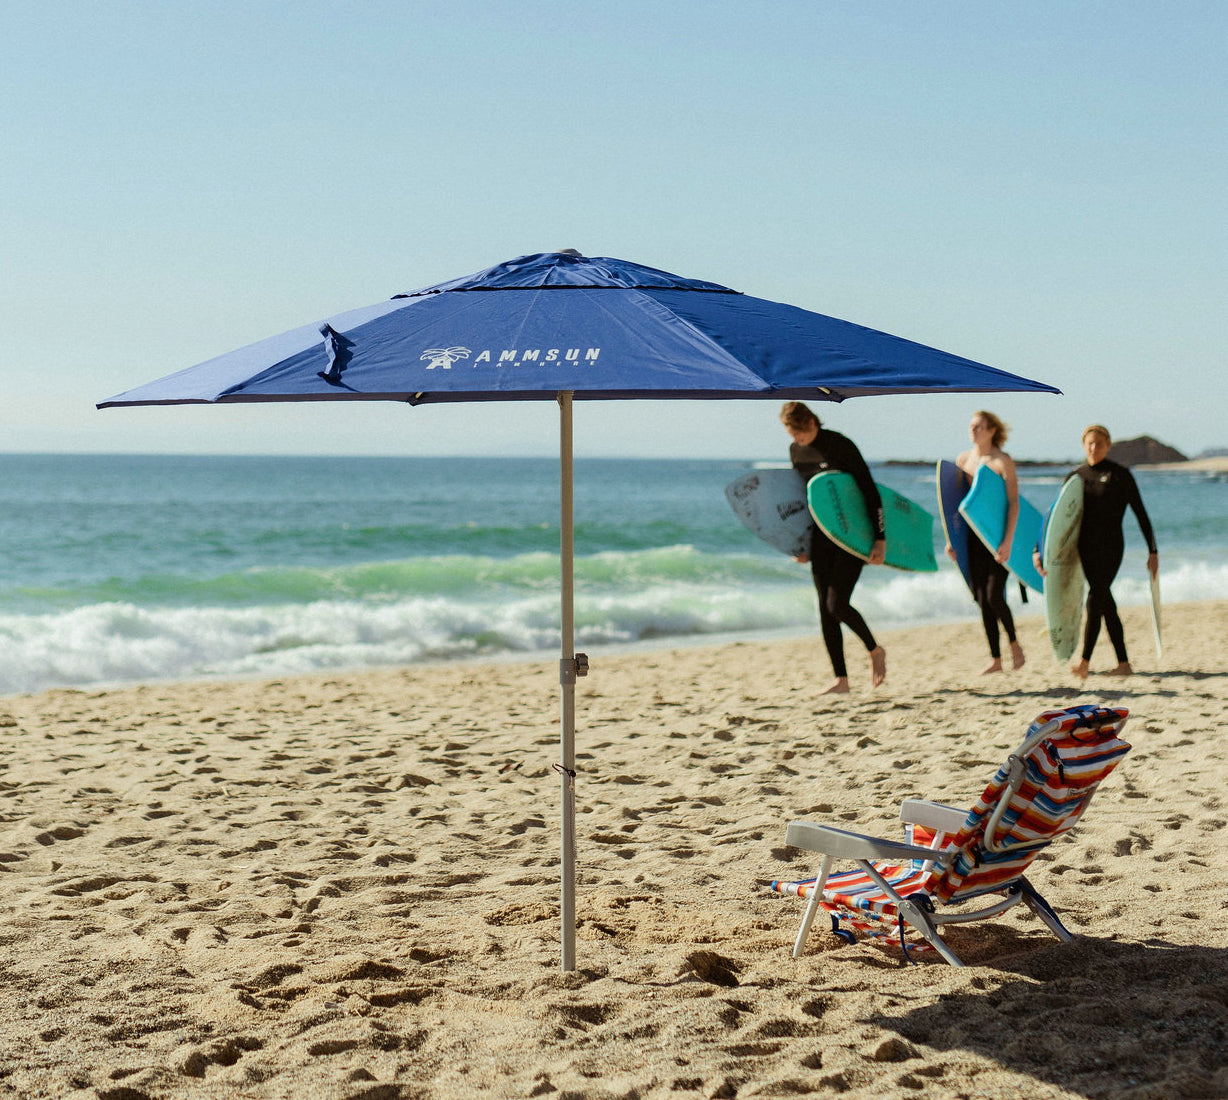 A Buying Guide to Choosing the Best Beach Umbrella